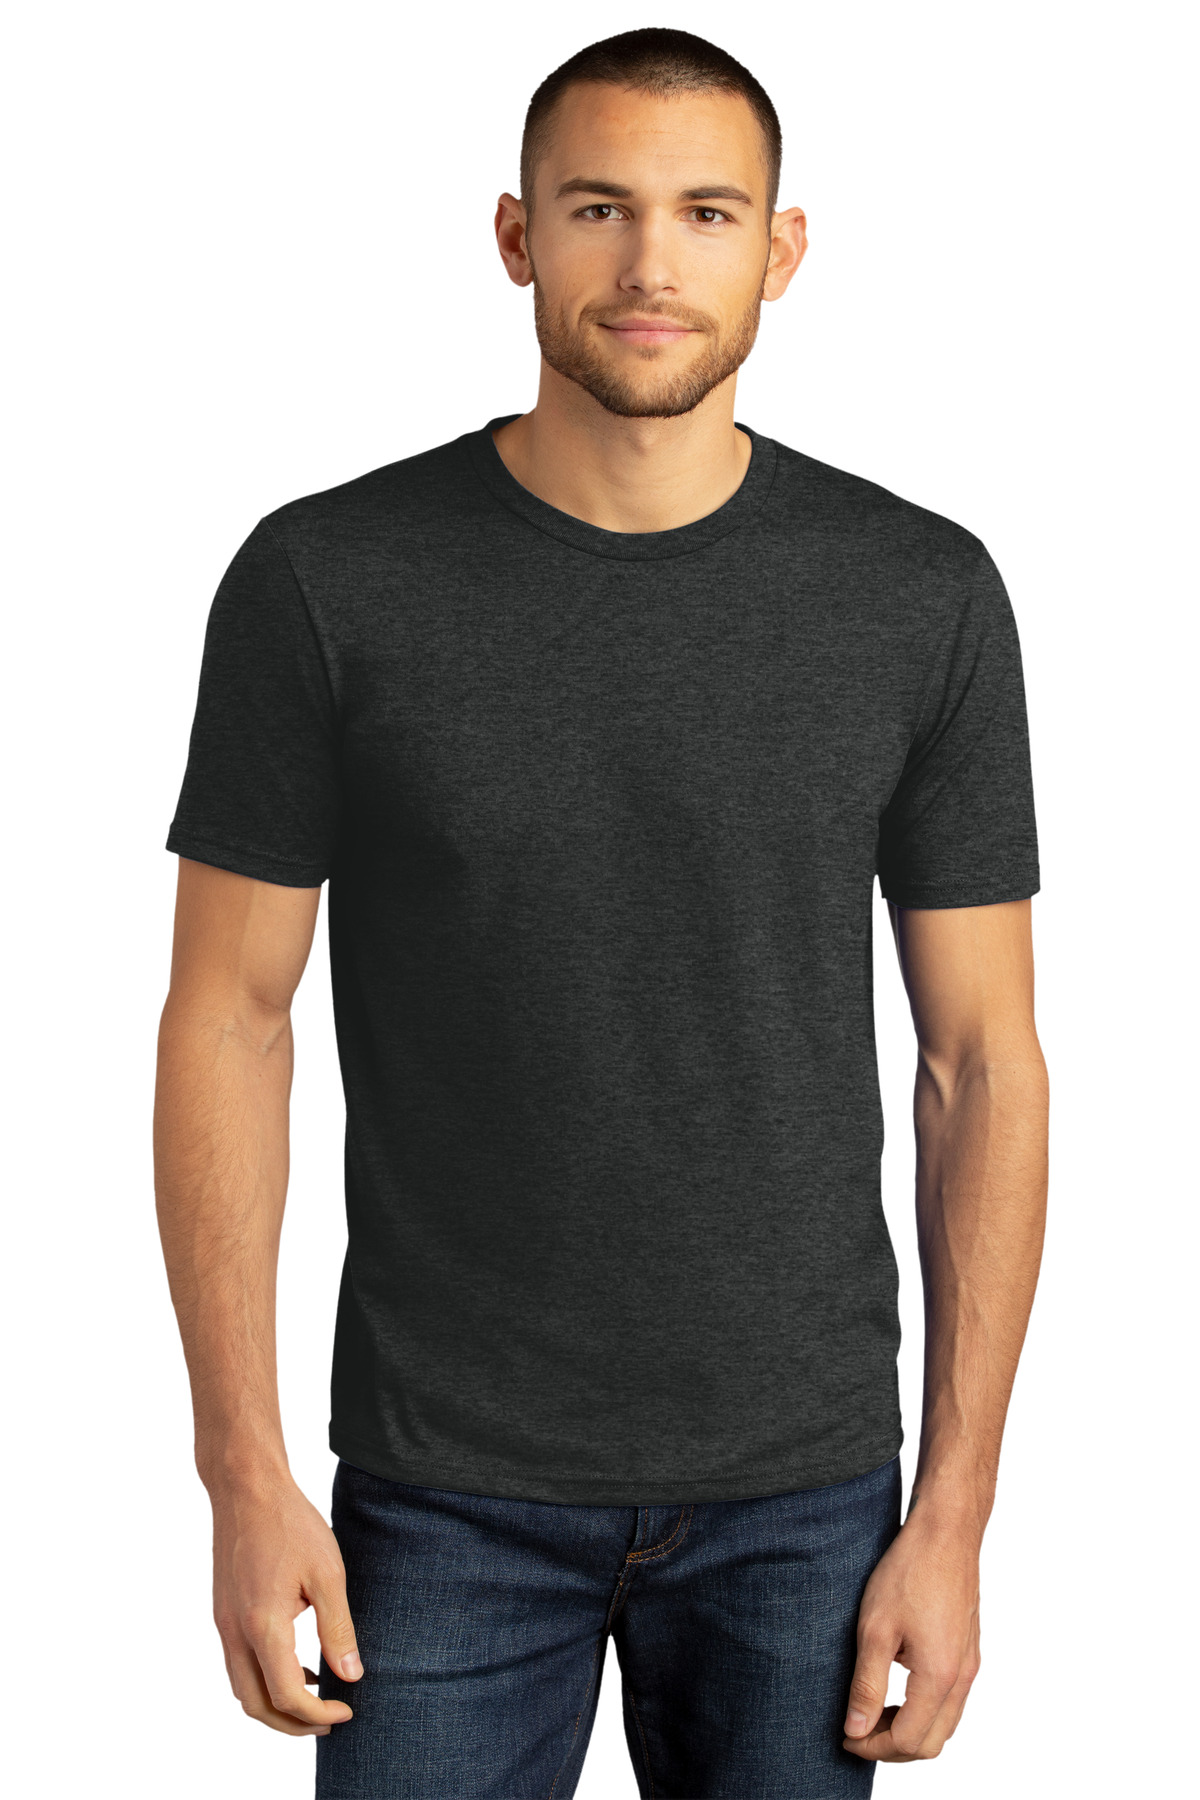 District DM130DTG | Perfect Tri ® DTG Tee | ShirtSpace